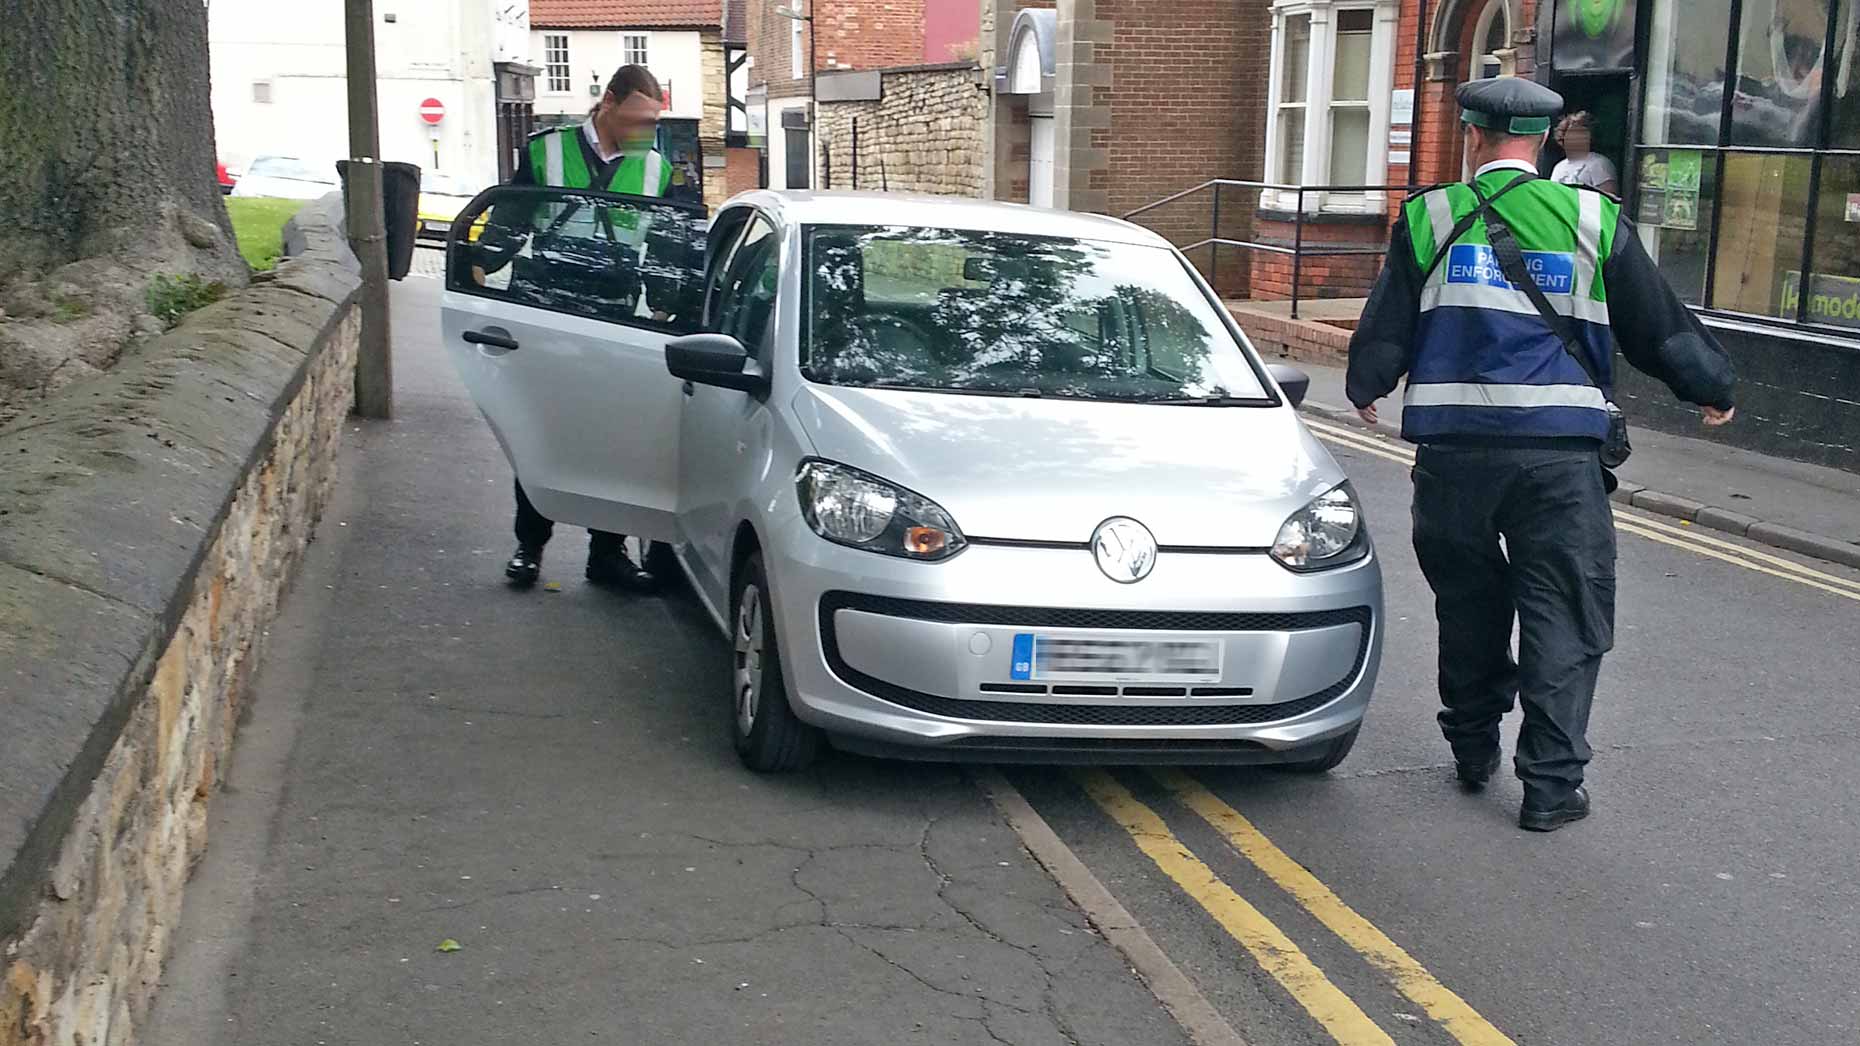 Traffic wardens captured parking on double yellow lines on St Martin's Lane in Lincoln to ticket motorists. The council said they are allowed to do so on the job. Photo: Andy Ferguson